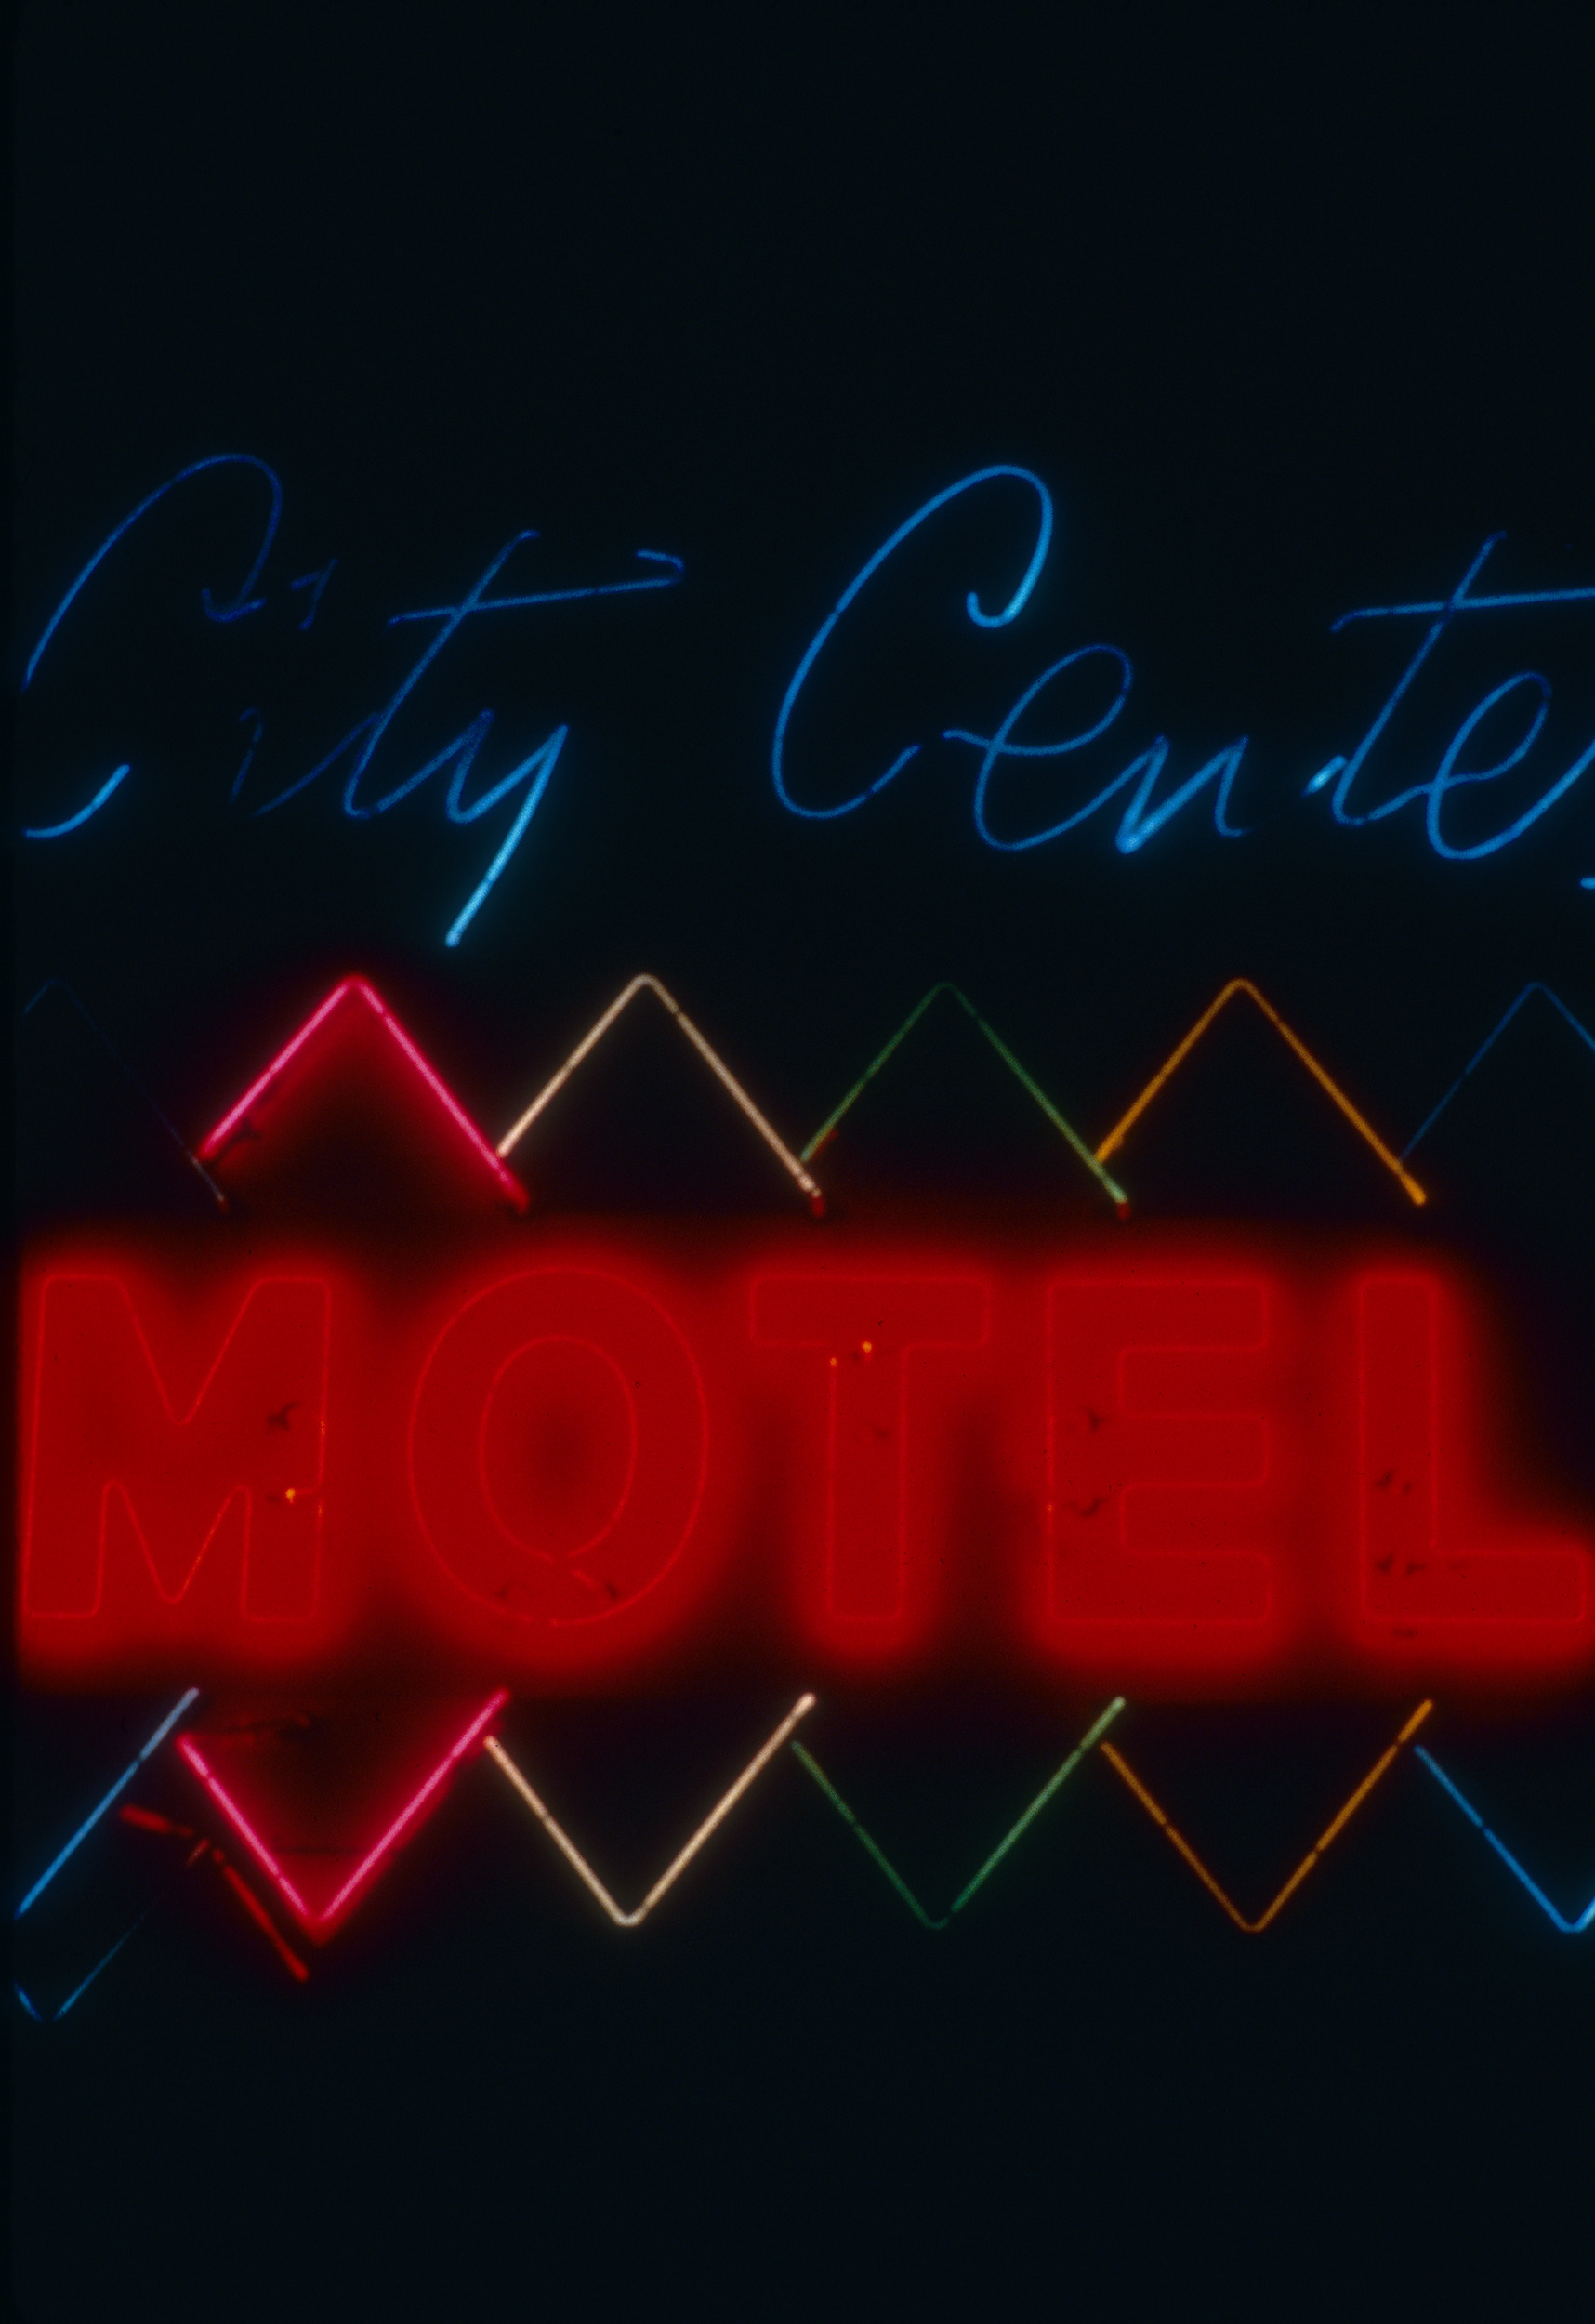 Slide of the neon sign for the City Center Motel at night, Reno, Nevada, 1986